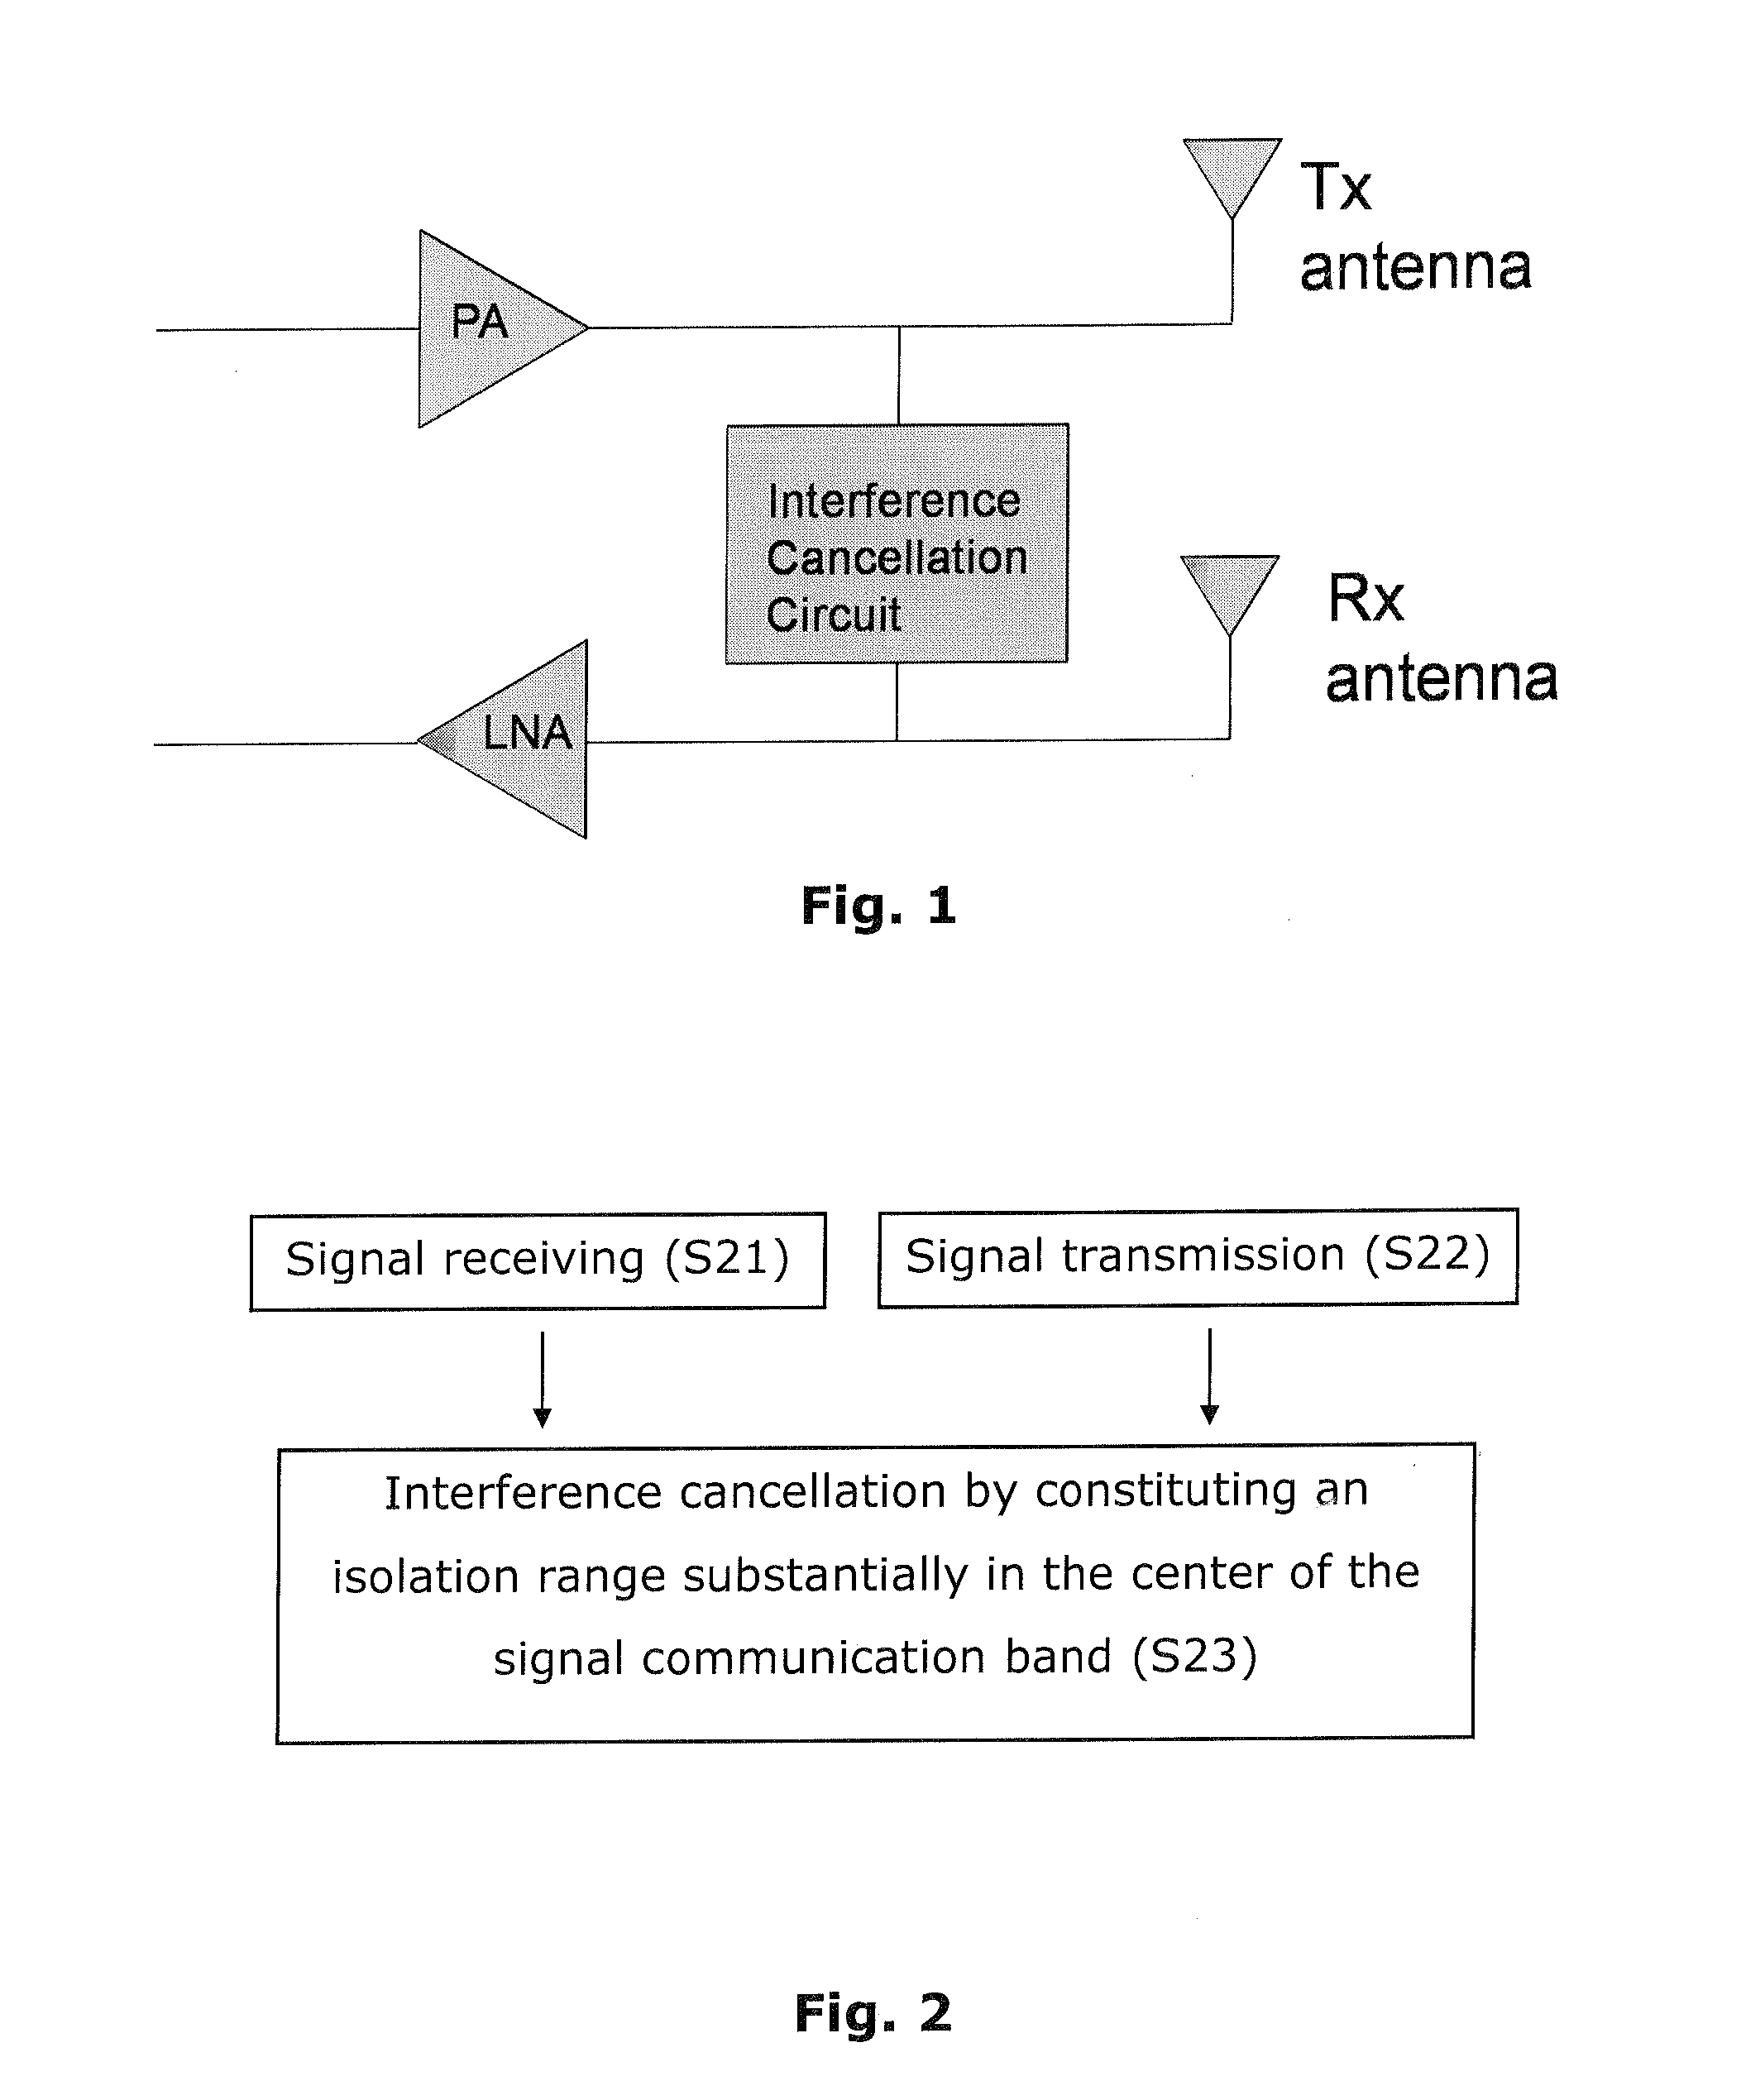 Full duplex system with self-interference cancellation